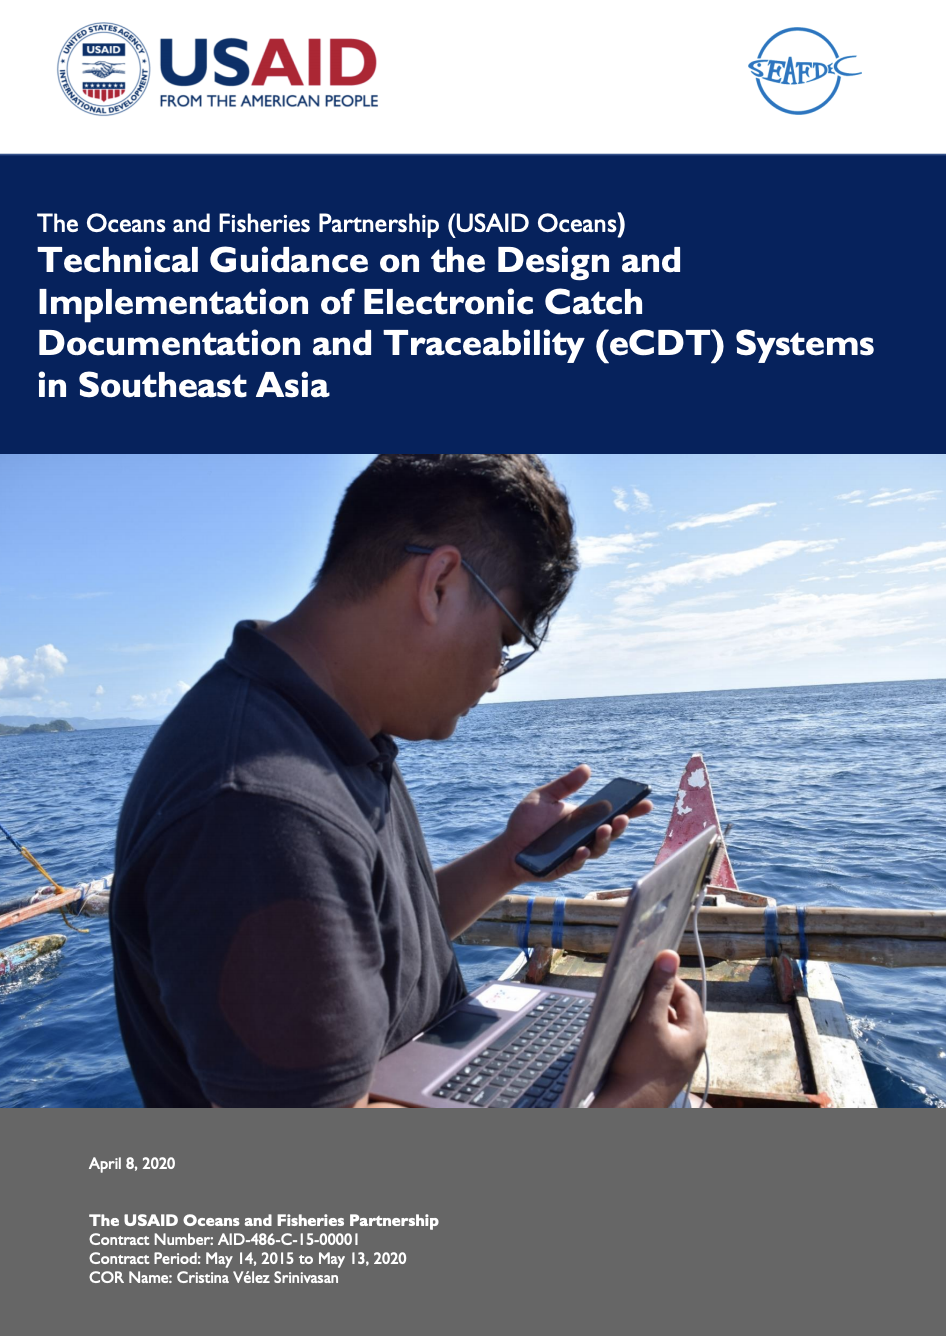 Technical Guidance on the Design and Implementation of Electronic Catch Documentation and Traceability Systems